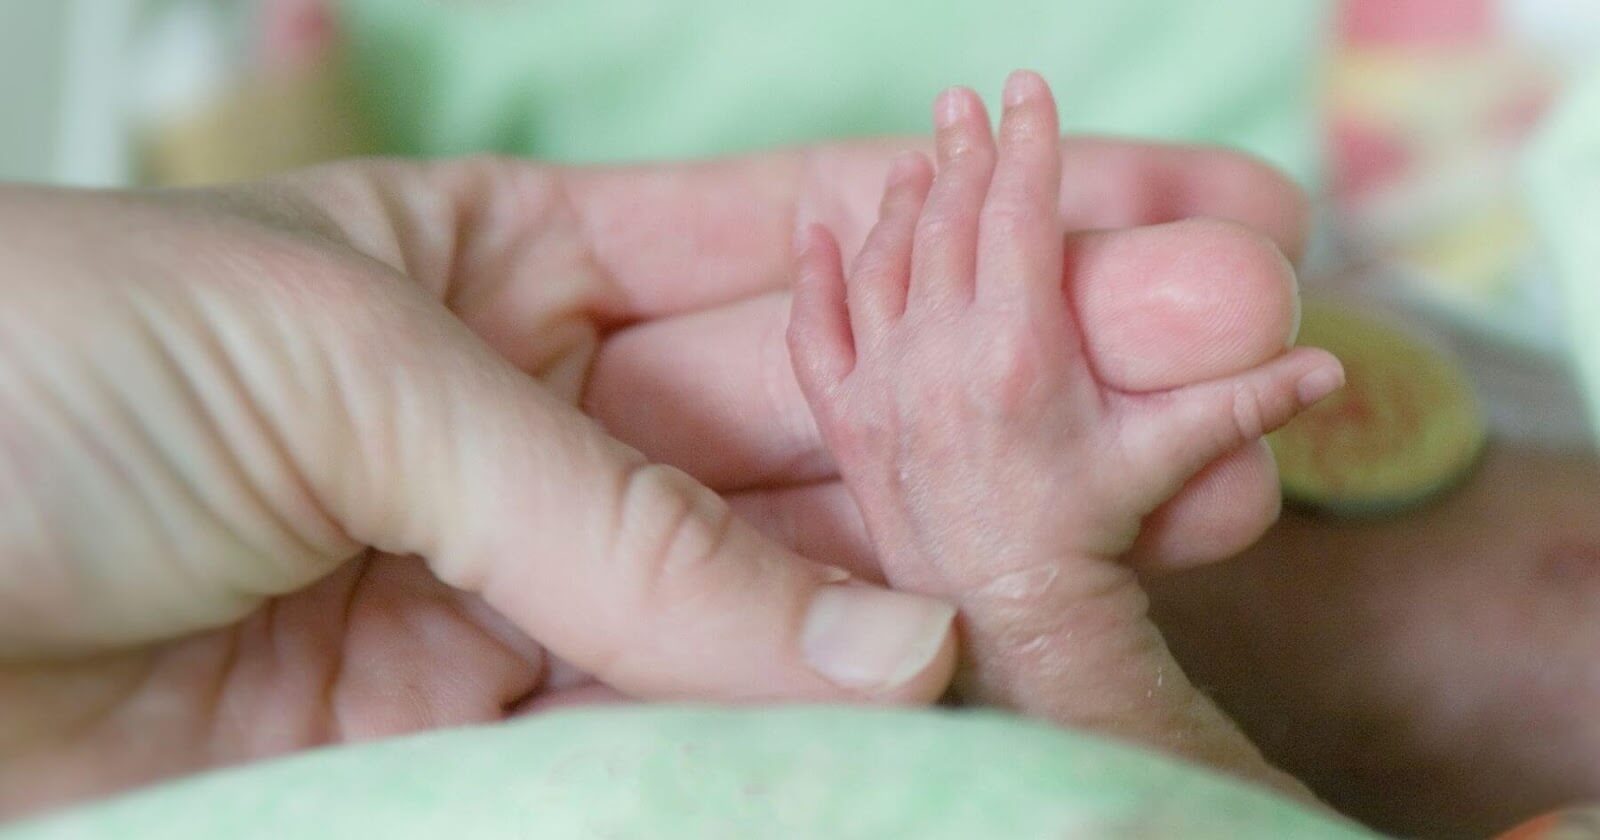 Three-day-old baby girl born prematurely passes away just hours after being brought home